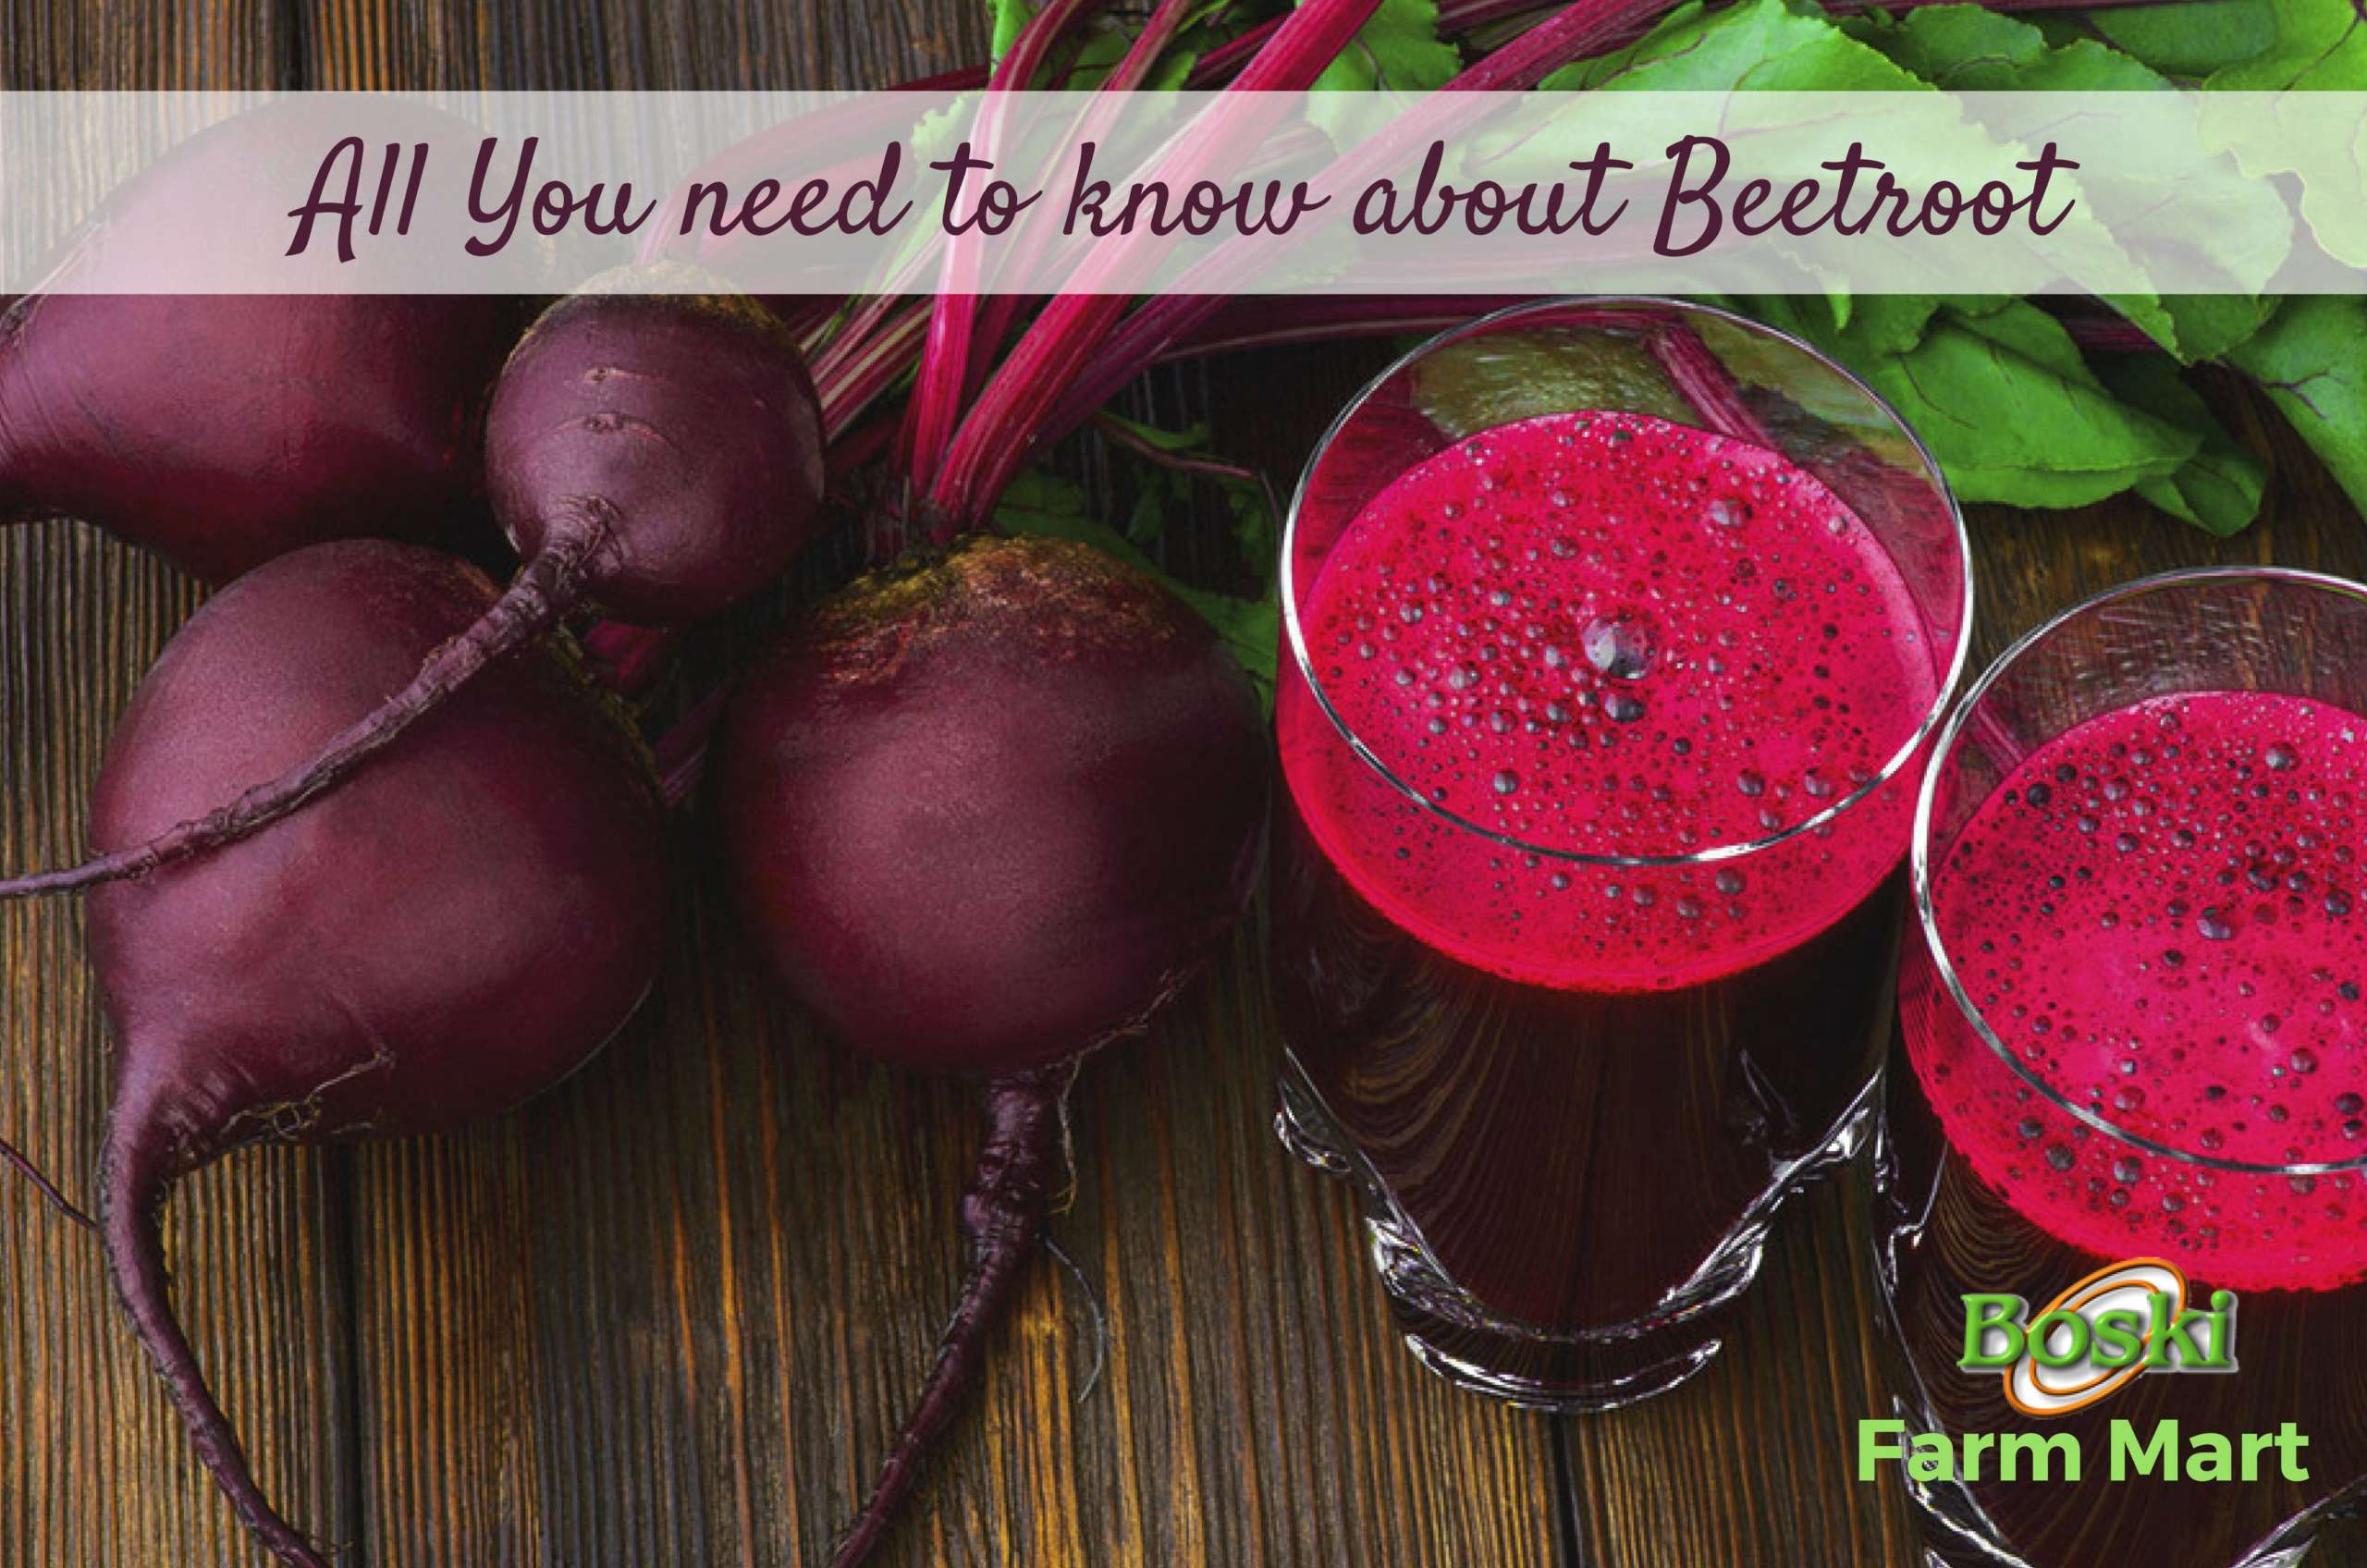 nutritional and health benefits of beetroot